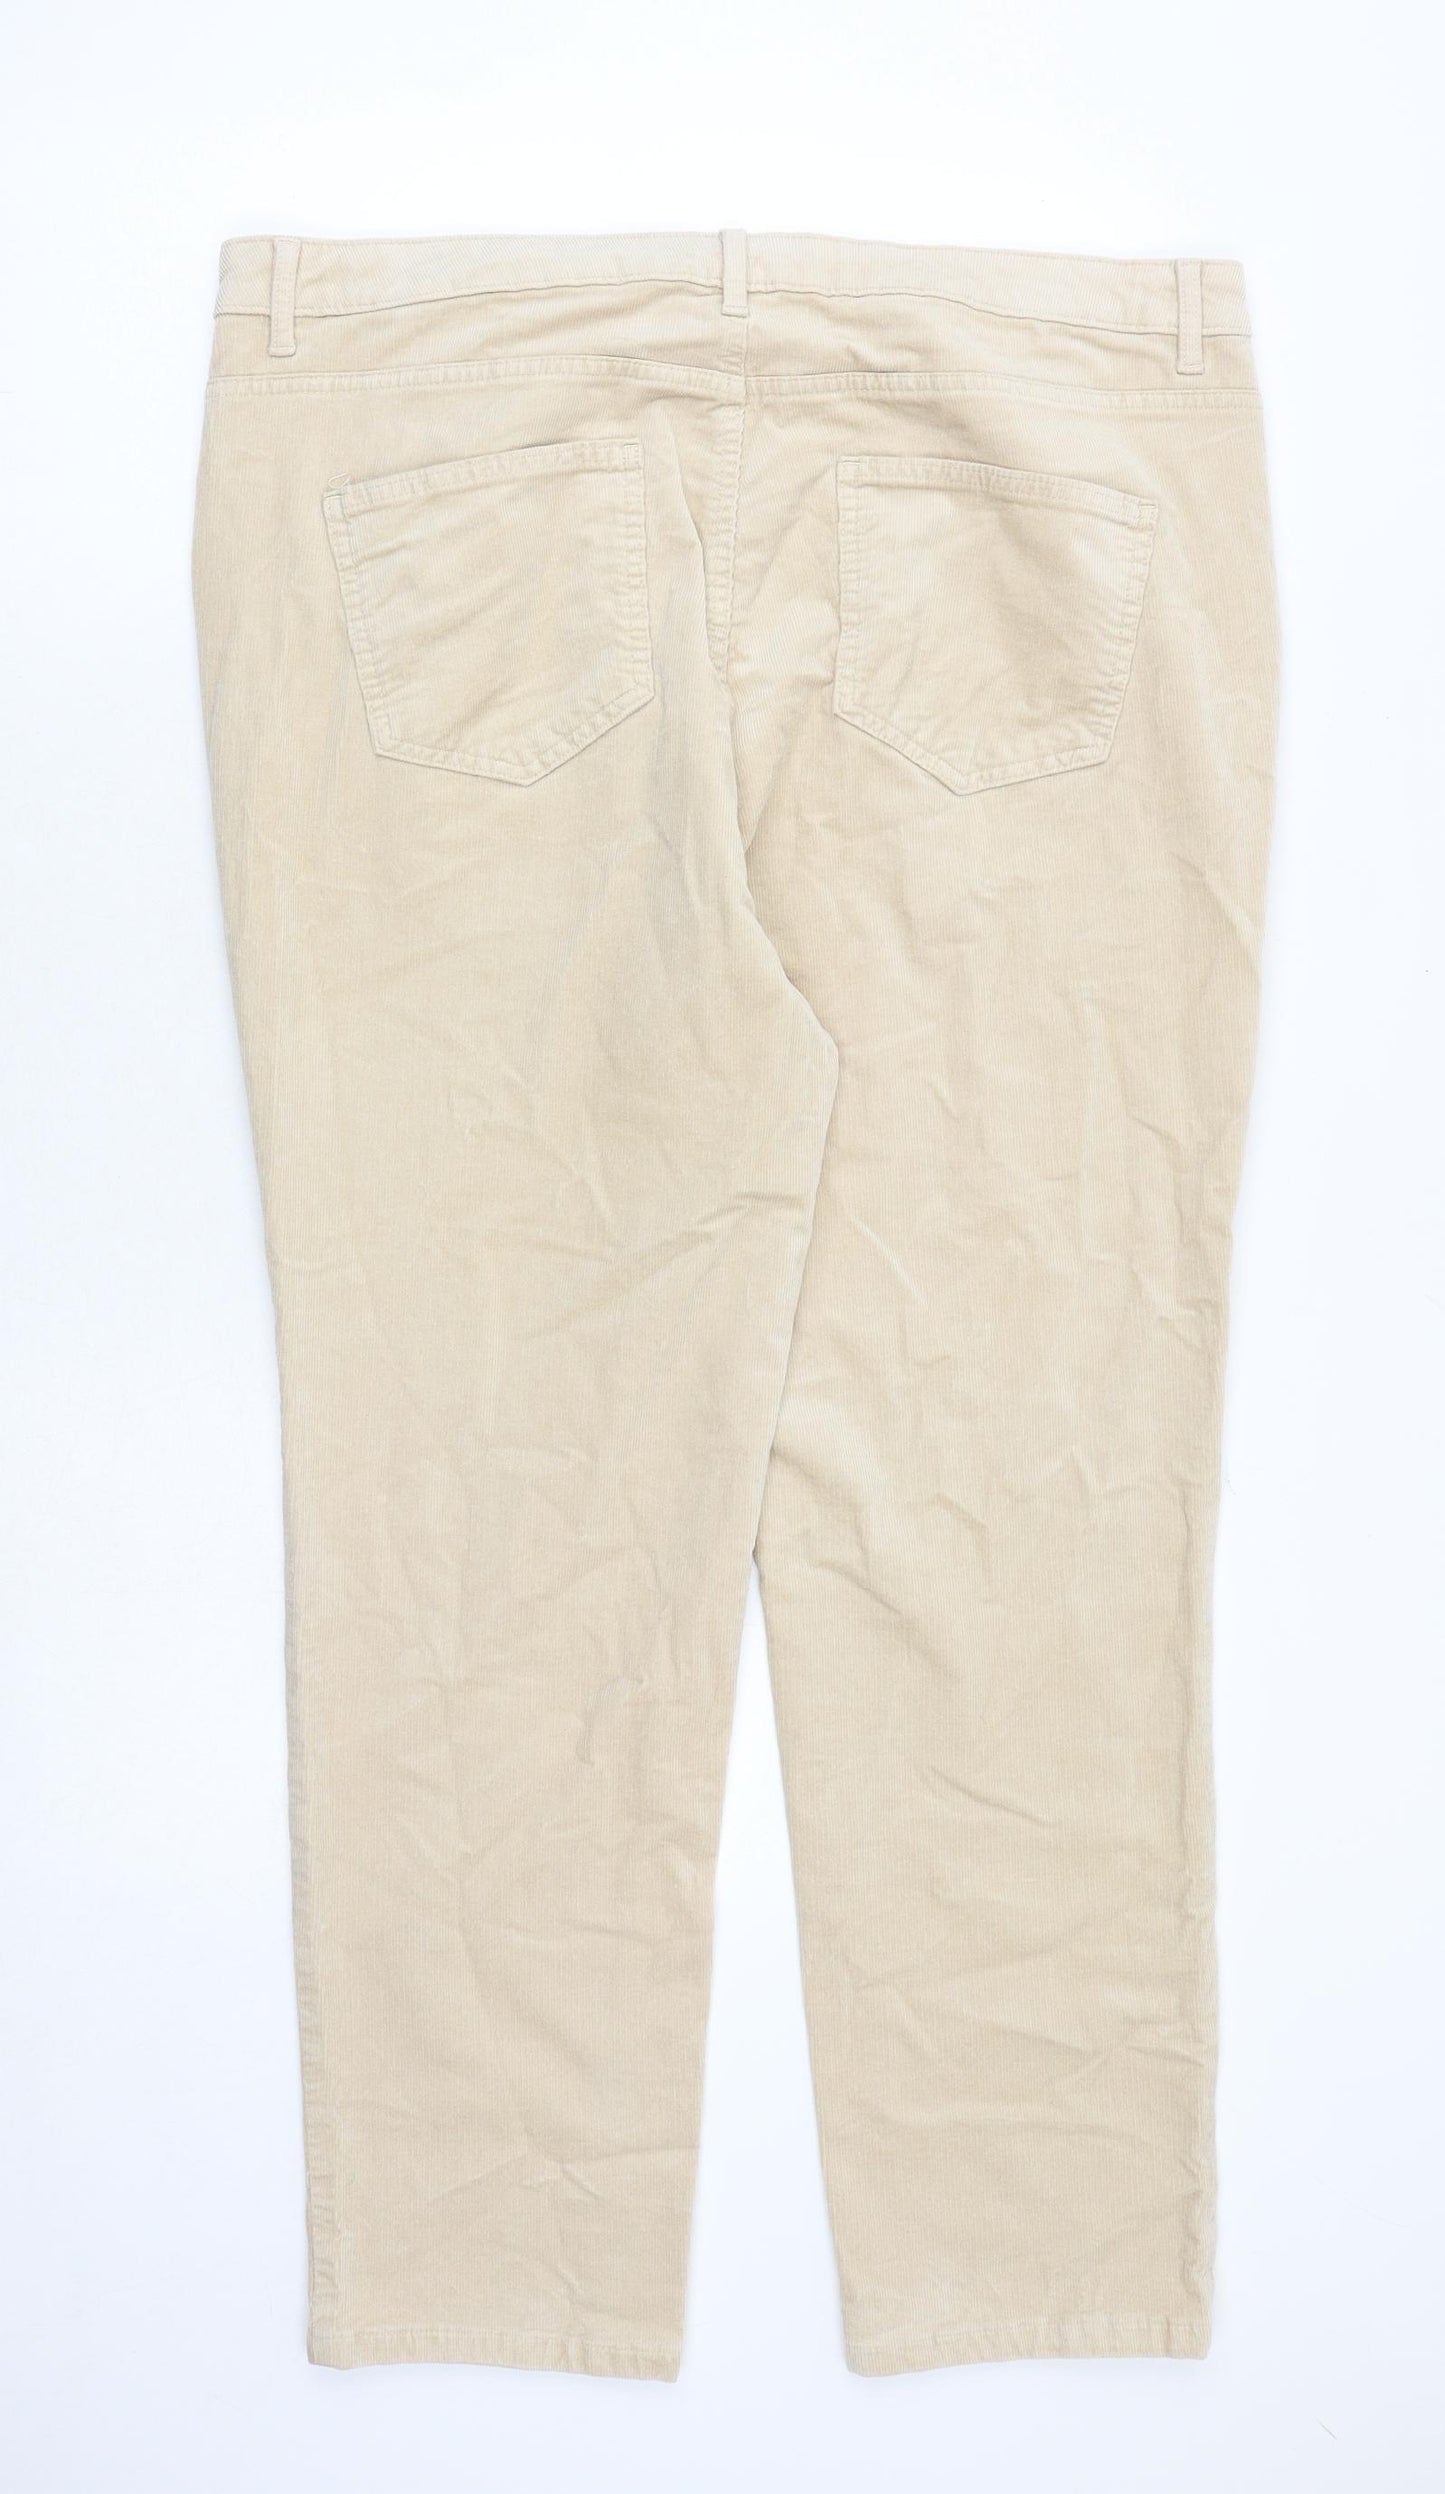 Marks and Spencer Womens Beige Cotton Trousers Size 20 Regular Zip